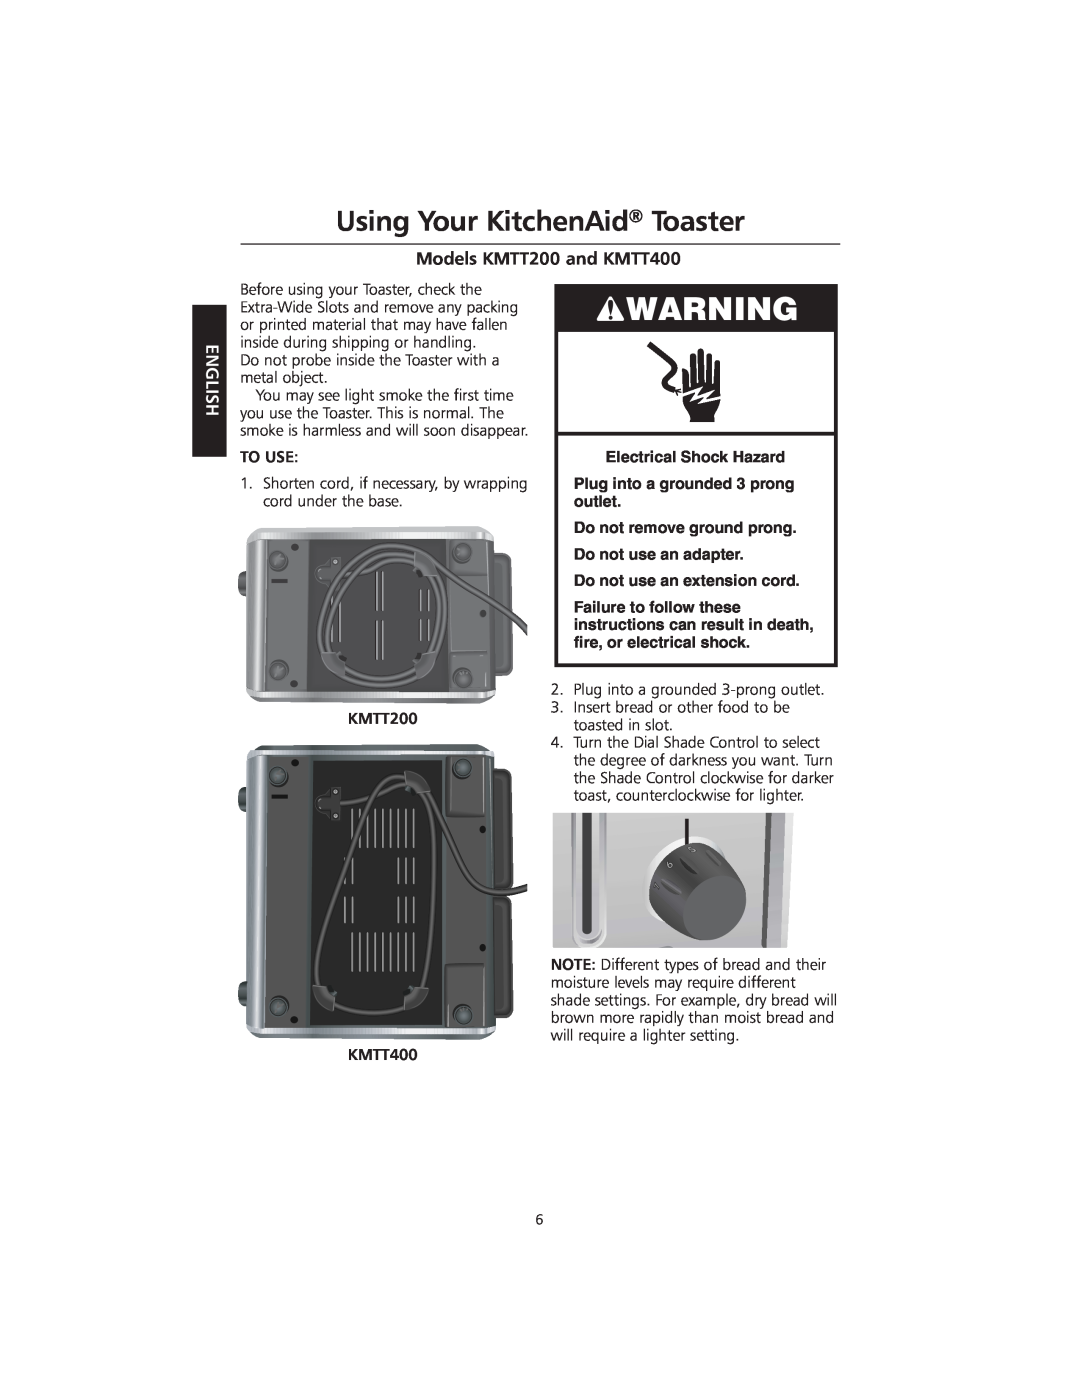 KitchenAid manual Using Your KitchenAid Toaster, Models KMTT200 and KMTT400, English, Do not use an extension cord 